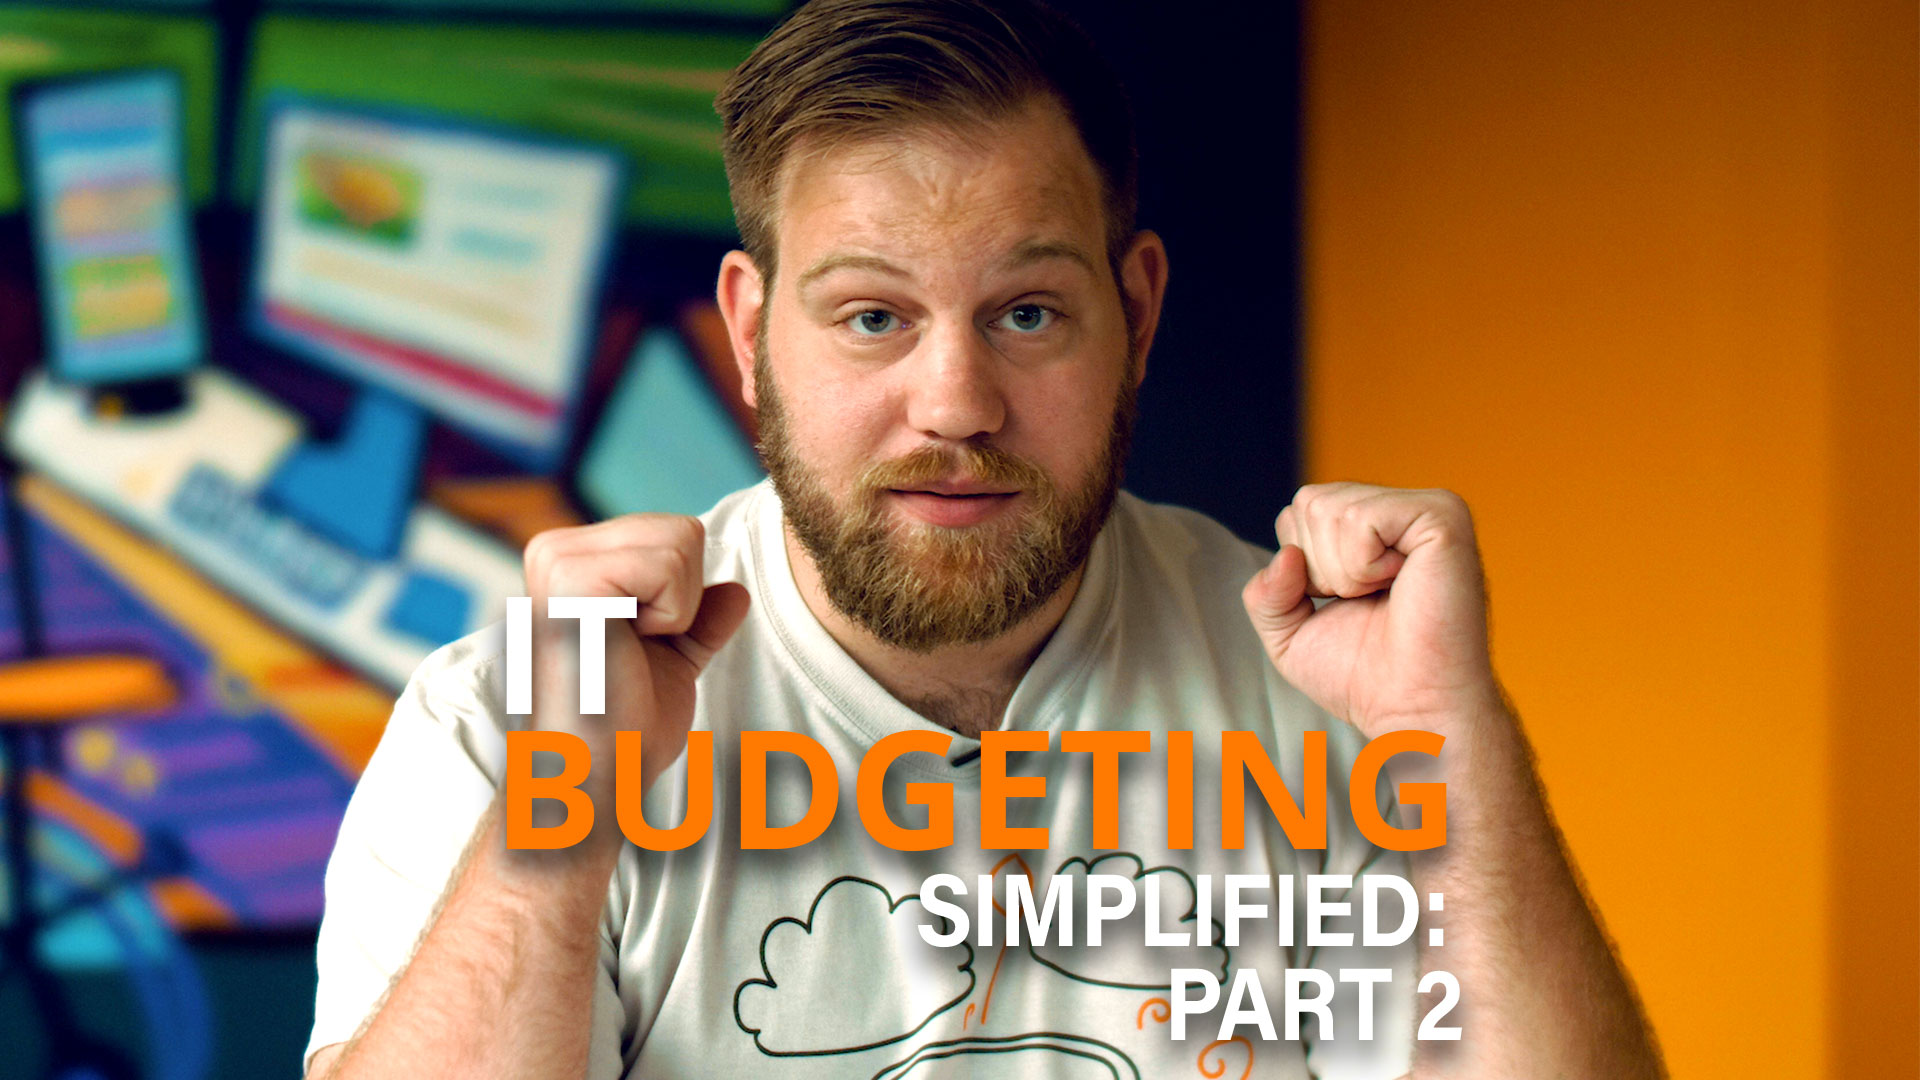 IT Budgeting Simplified: Part 2